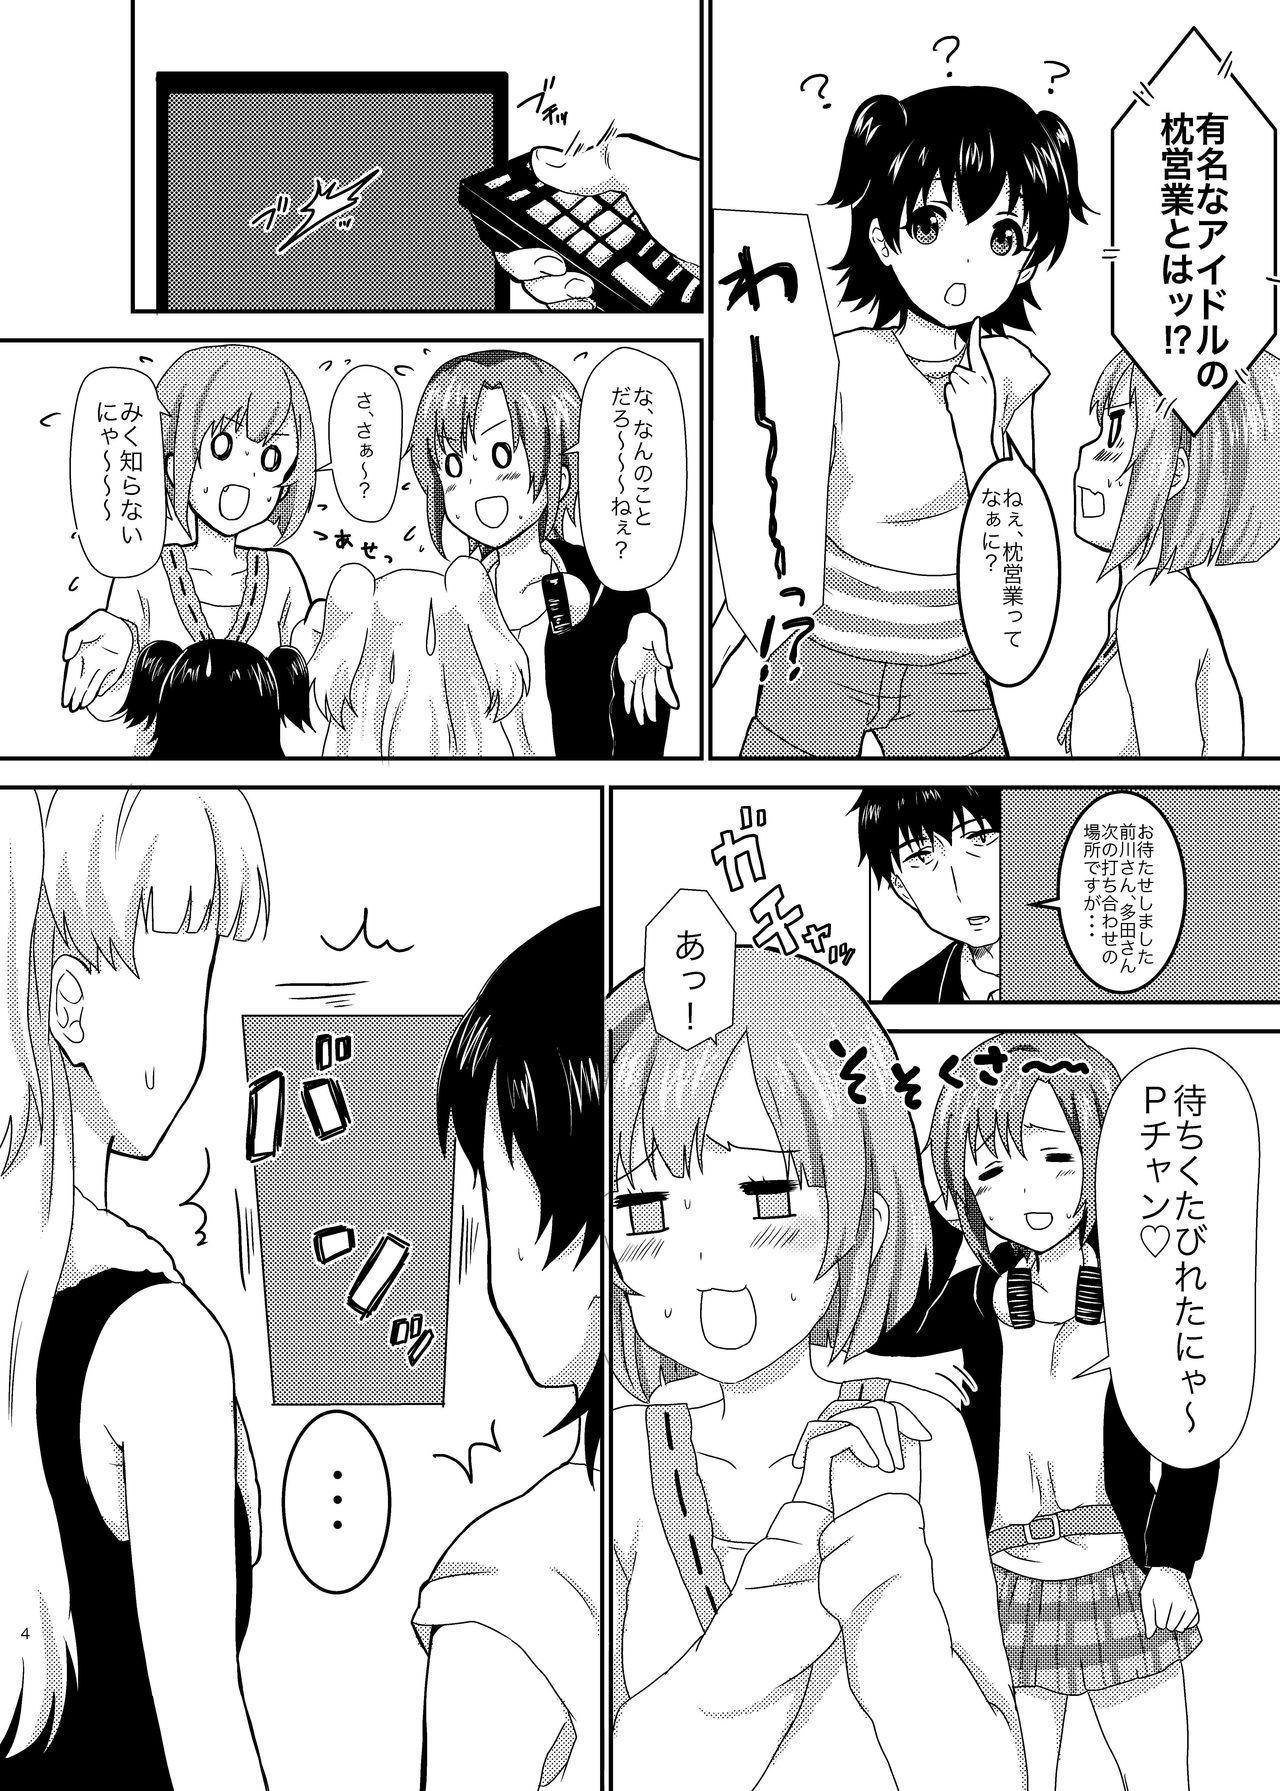 Cuminmouth office+love3 - The idolmaster Blow Jobs - Page 3